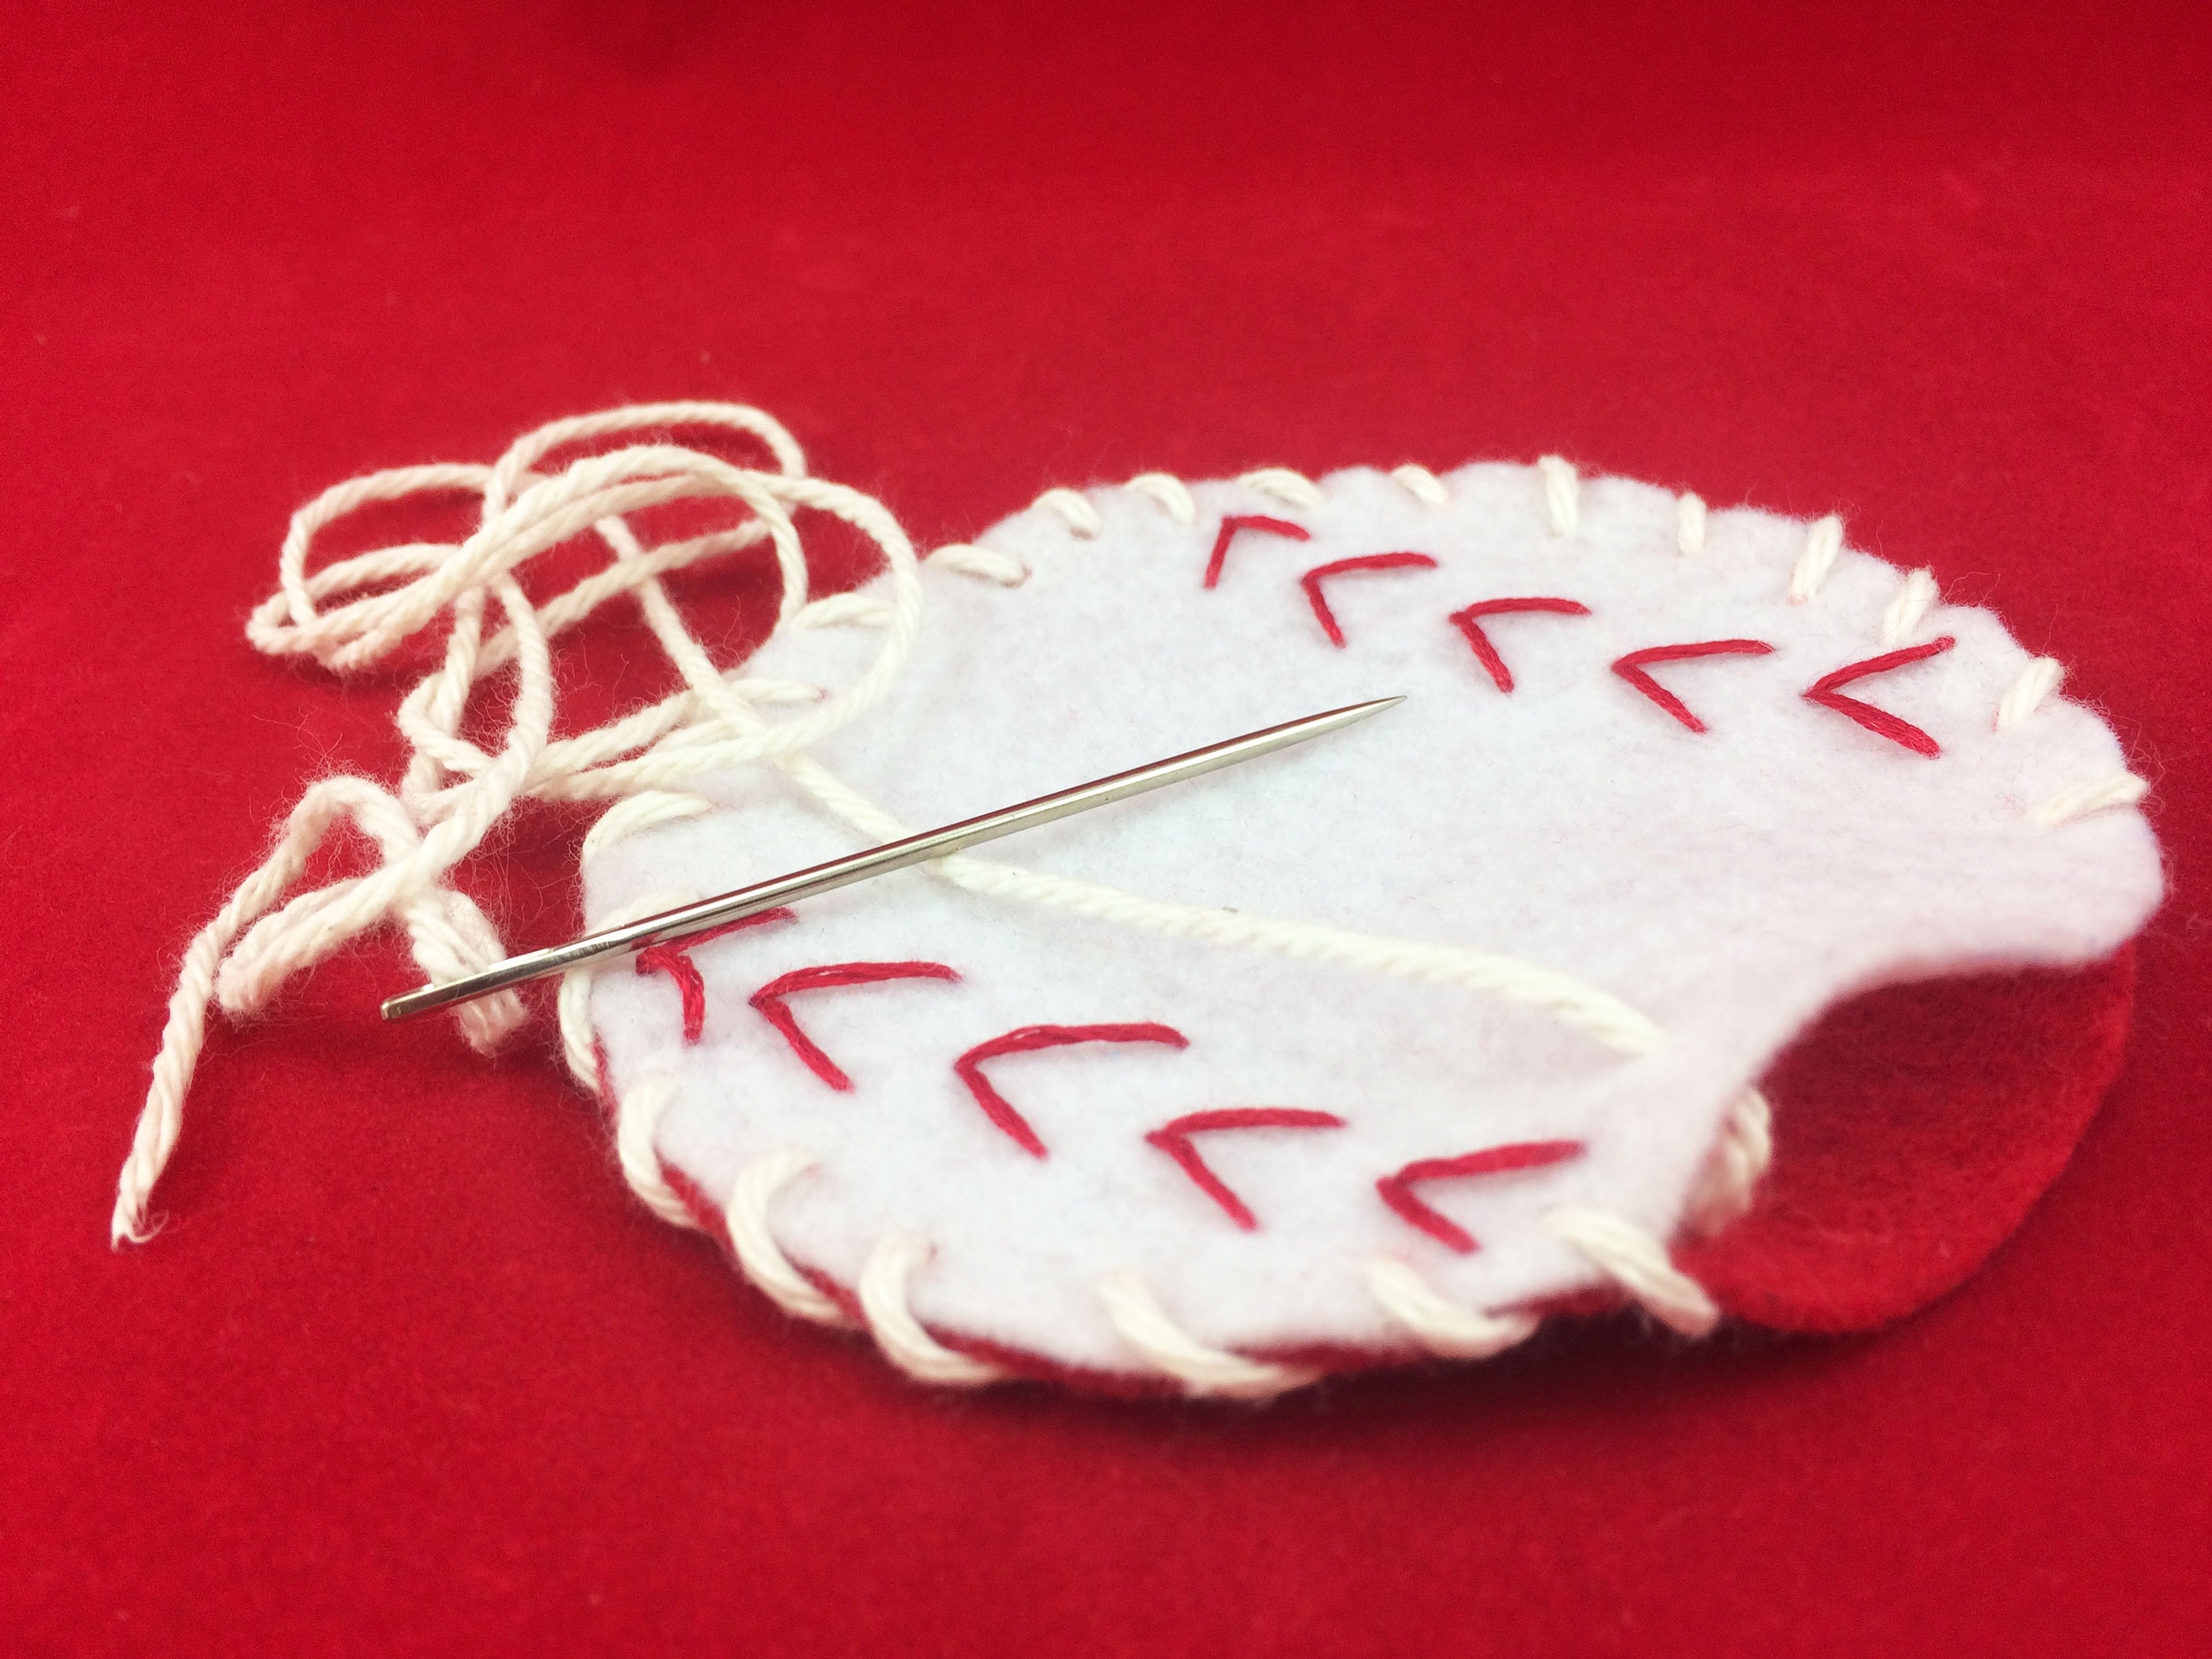 Red felt circle sewn to the back of white baseball with white string. | OrnamentShop.com